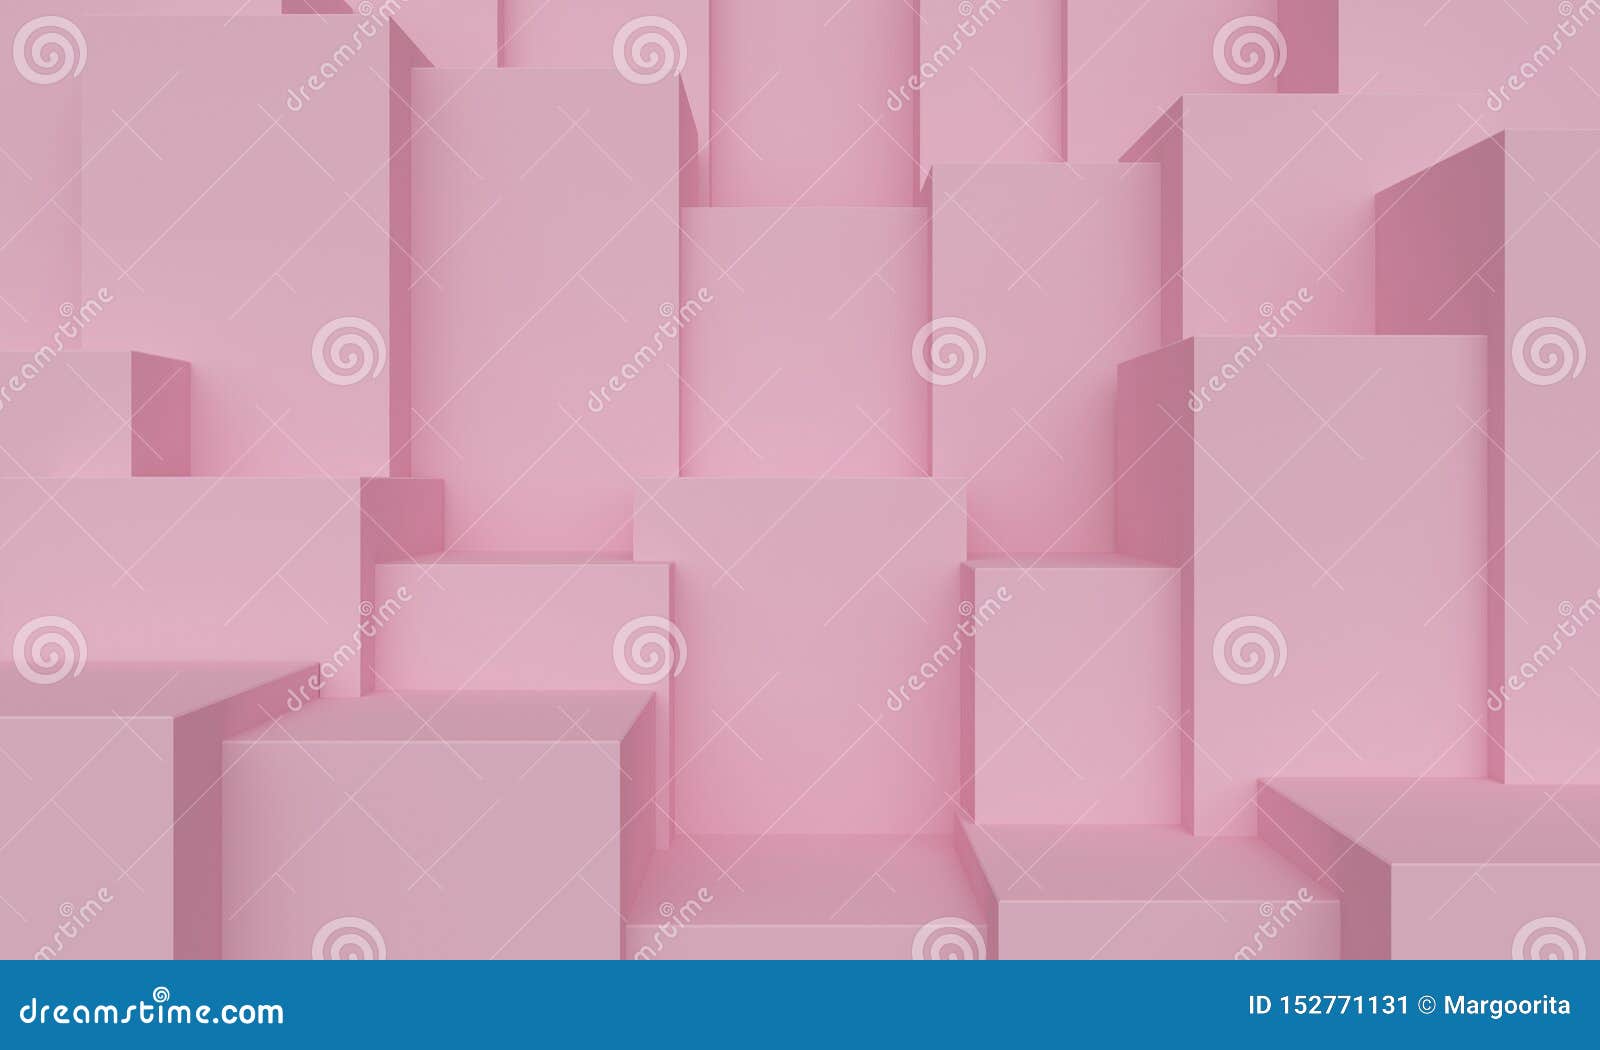 Geometric Pink Abstract Background with Square Platforms. 3d Rendering ...